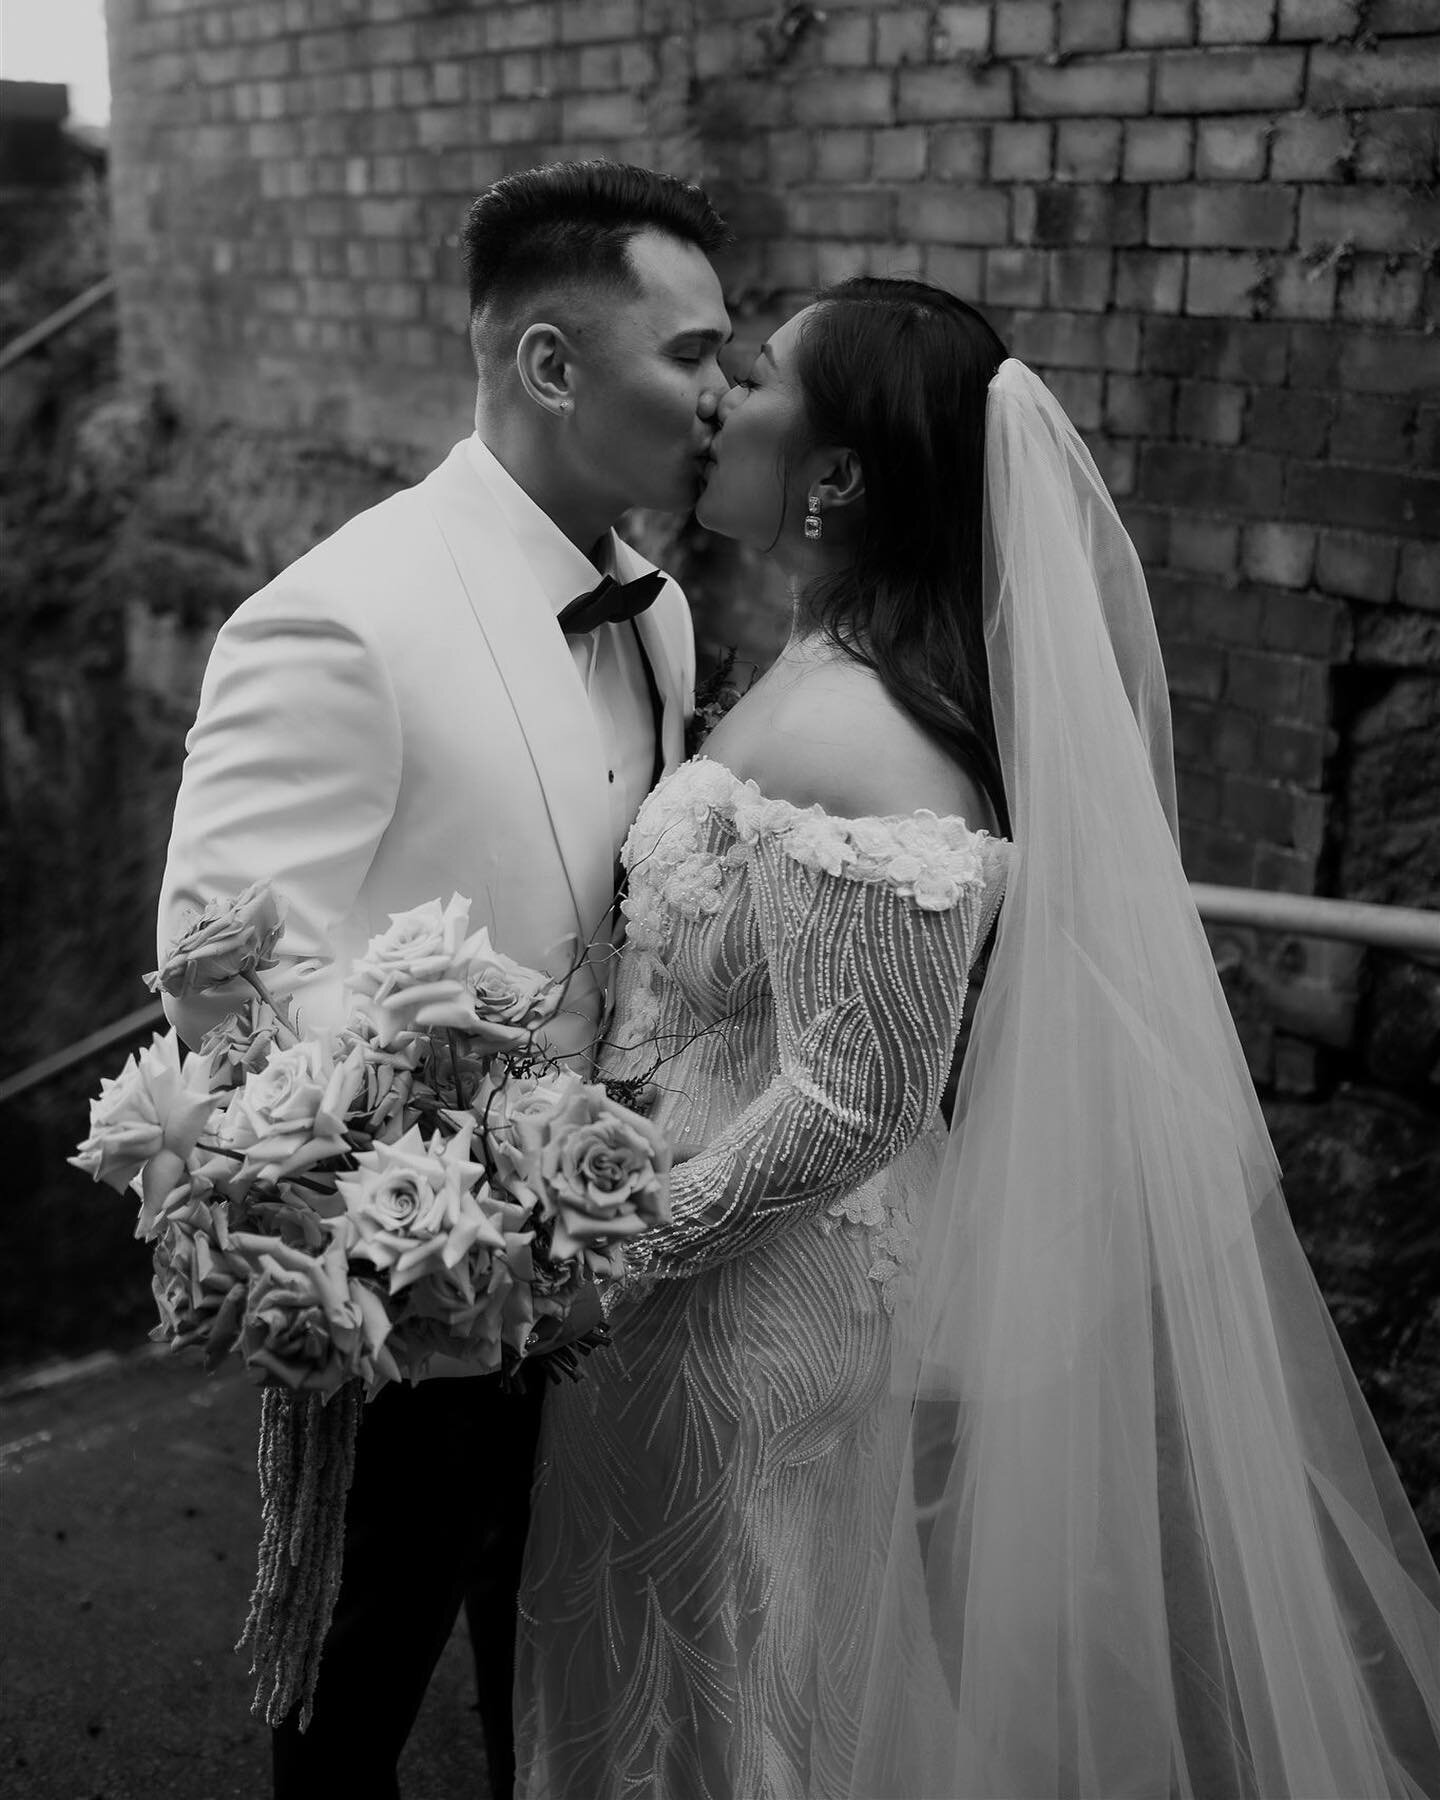 Kaena and Aries, an absolutely favourite with @elopementcollective and @jasoncorrotophoto 

Film: @bulb.creative 
Celebrant: @hellojoshwithers 

⁠
⁠
⁠
⁠
⁠
⁠
⁠
⁠
⁠
⁠
⁠
⁠
⁠
⁠
⁠
⁠
⁠
⁠
#thelillipillian #hellomay #elopementcollective #beachwedding #sydney